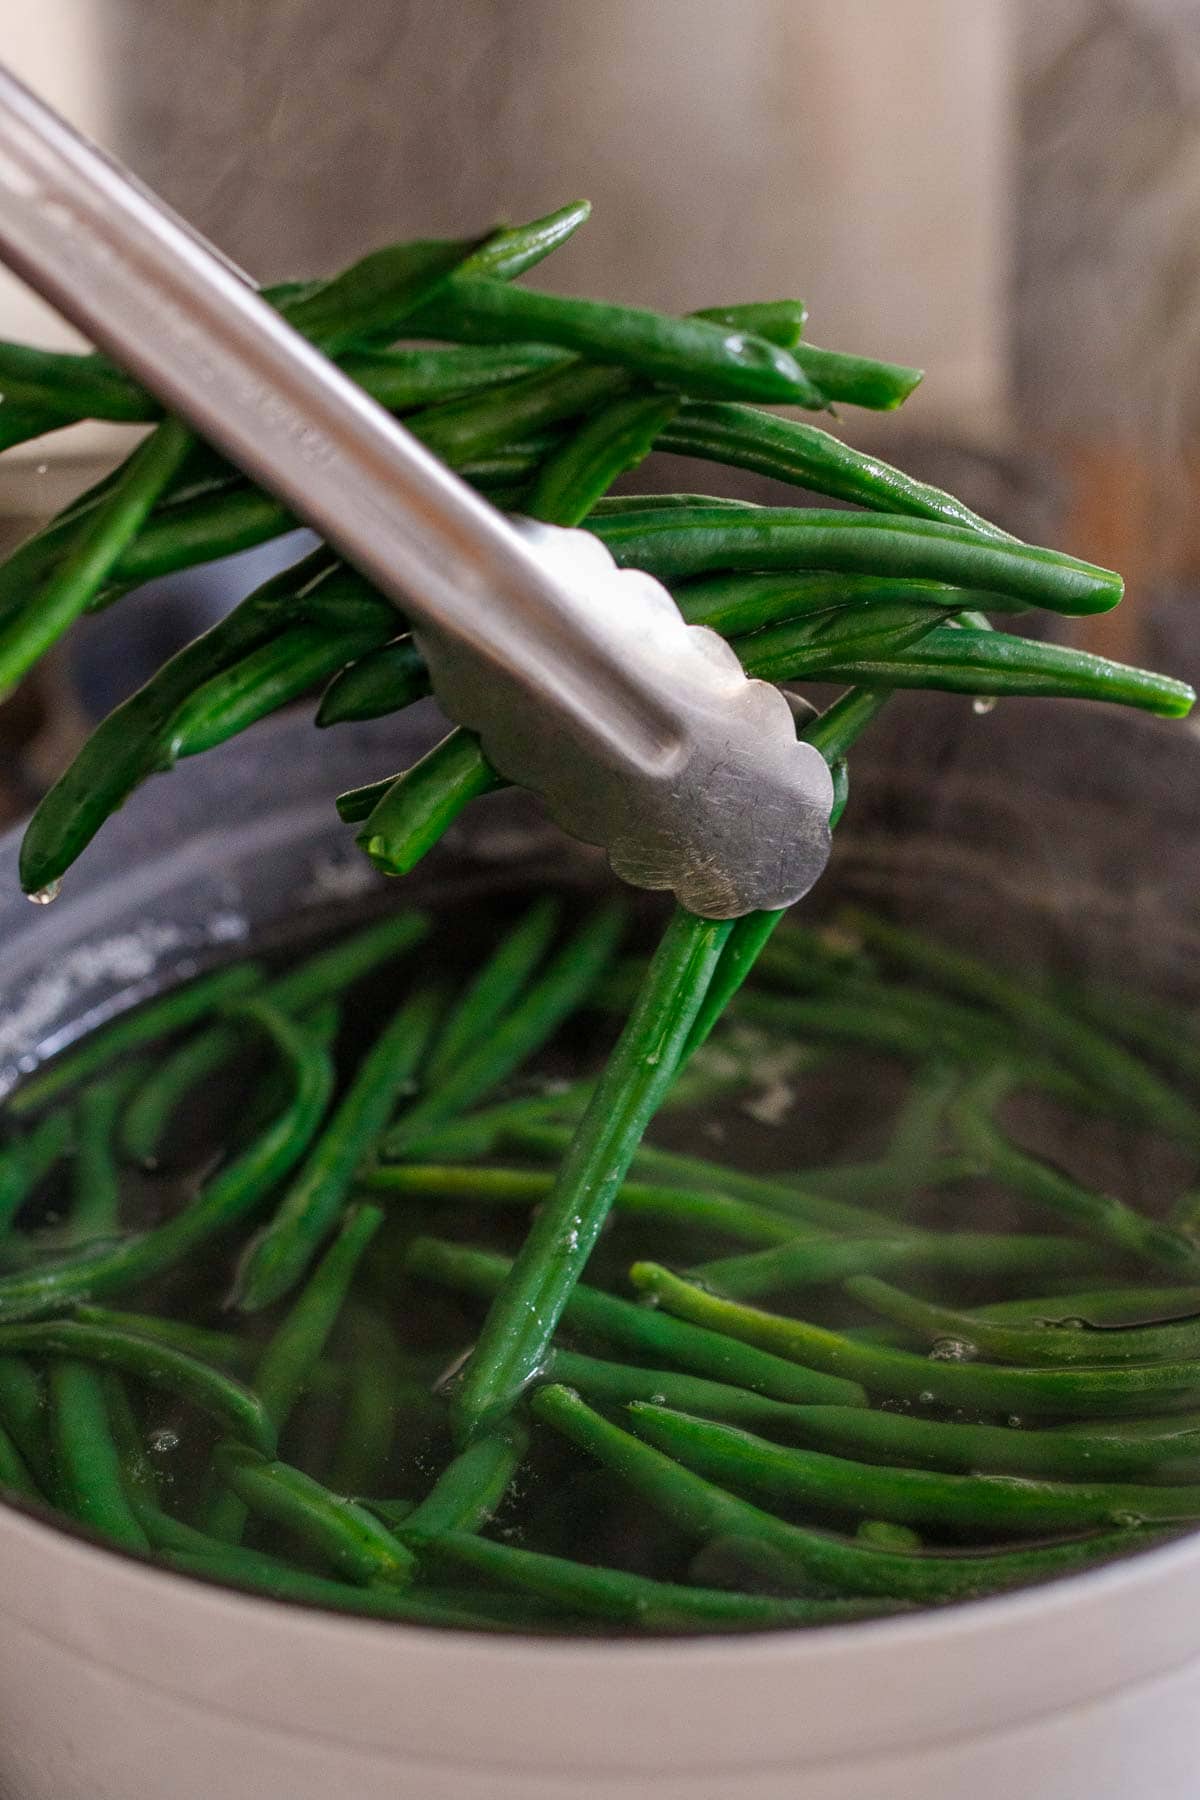 tongs removing blanched green beans from pot of water